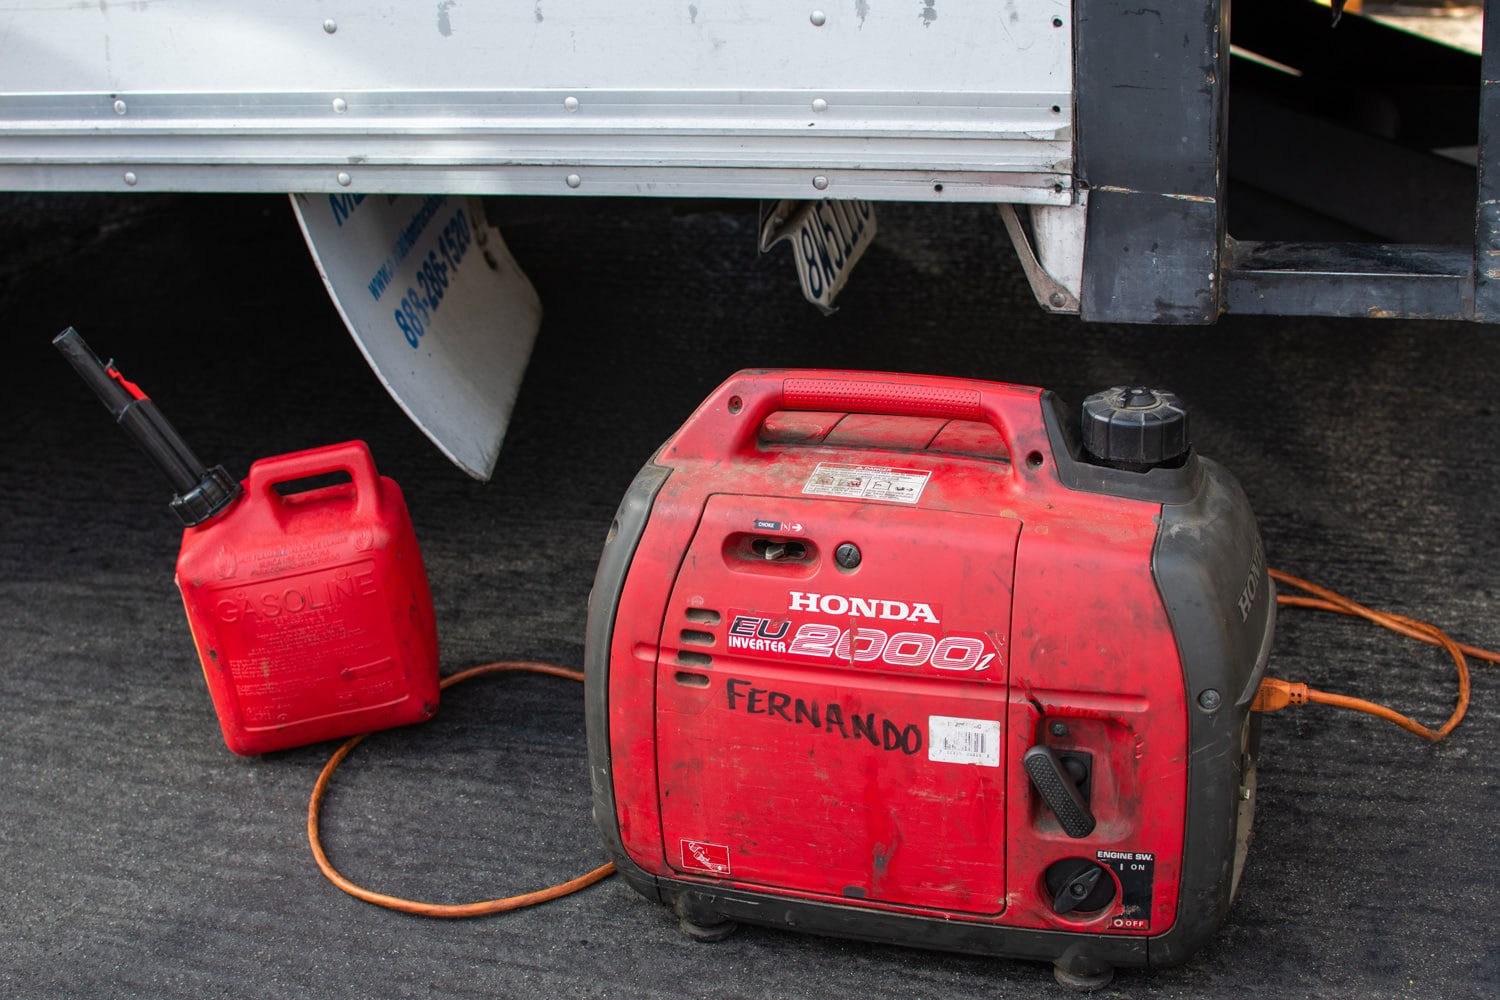 A Honda EU 2000i Inverter generator and gas can sit by a truck at the Canoga Park Farmer's Market on Owensmouth Ave.